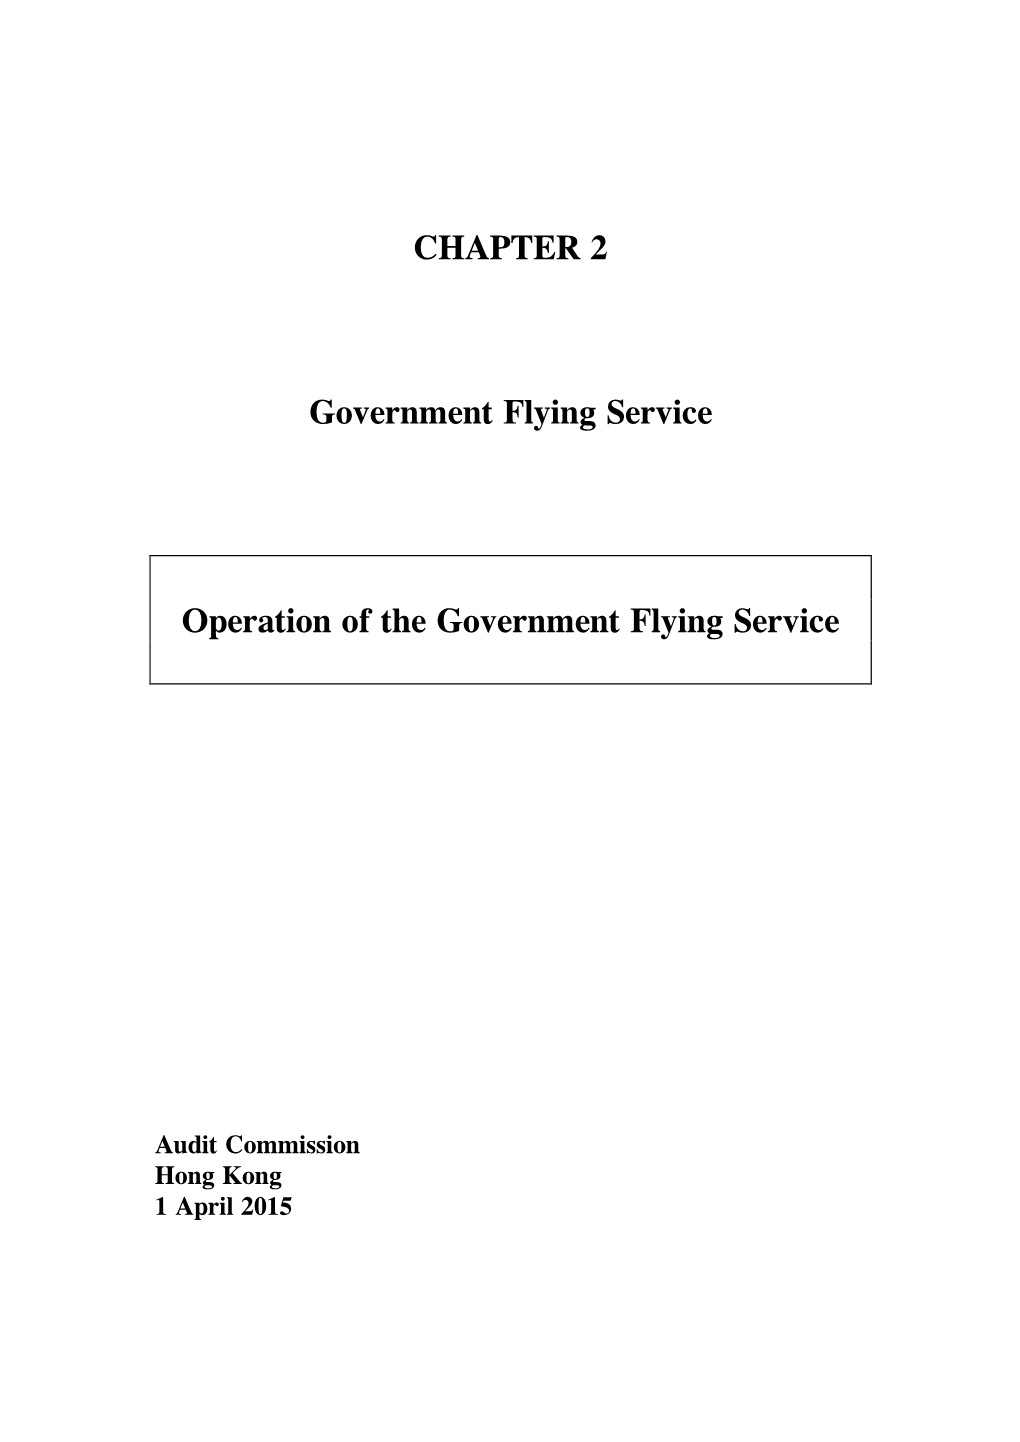 CHAPTER 2 Government Flying Service